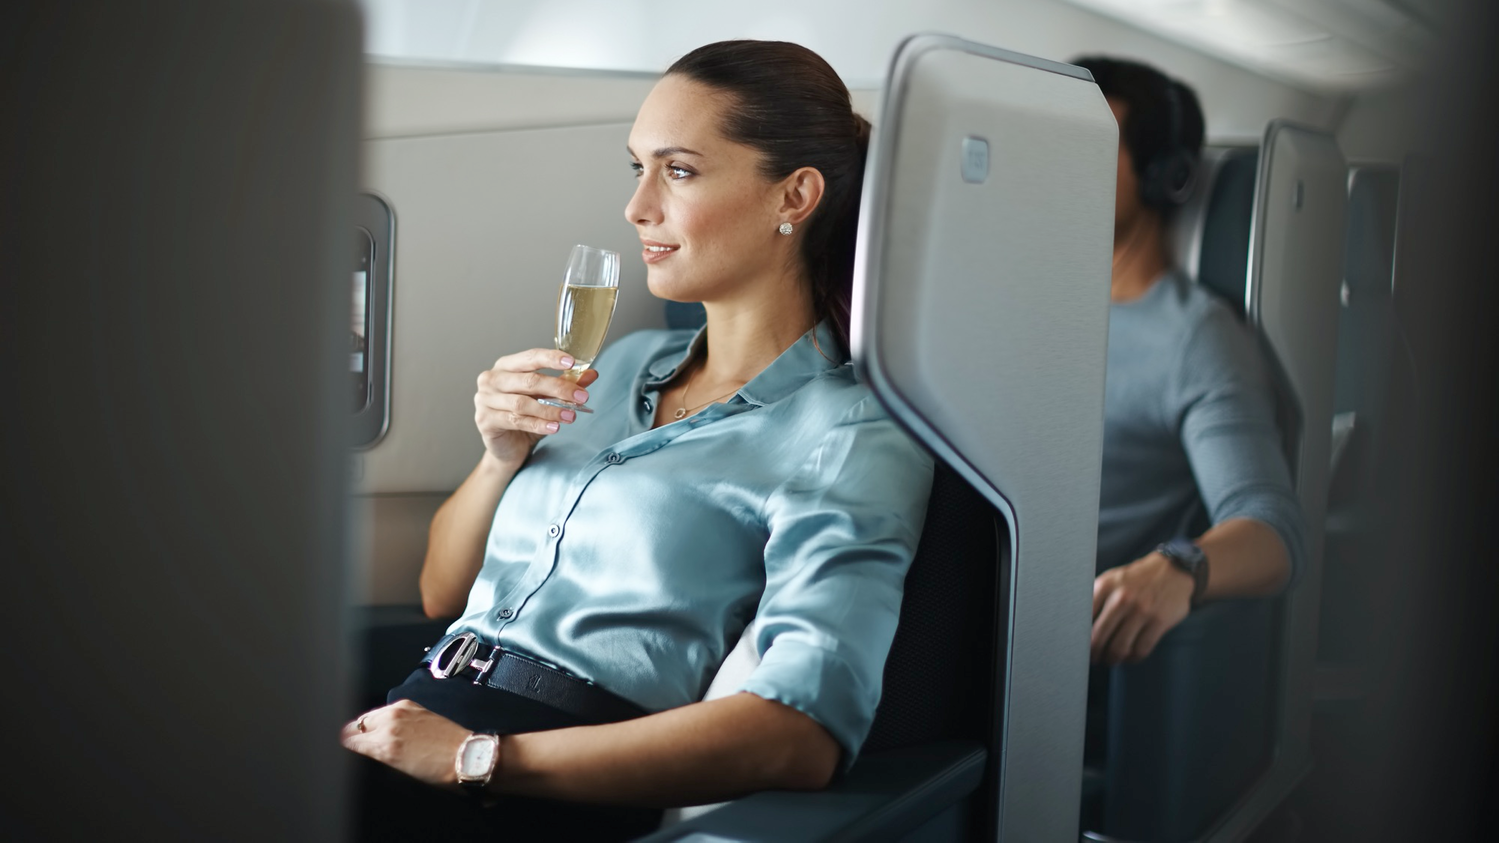 Guide: how to enjoy wine on a plane (not just drink it) - Executive ...